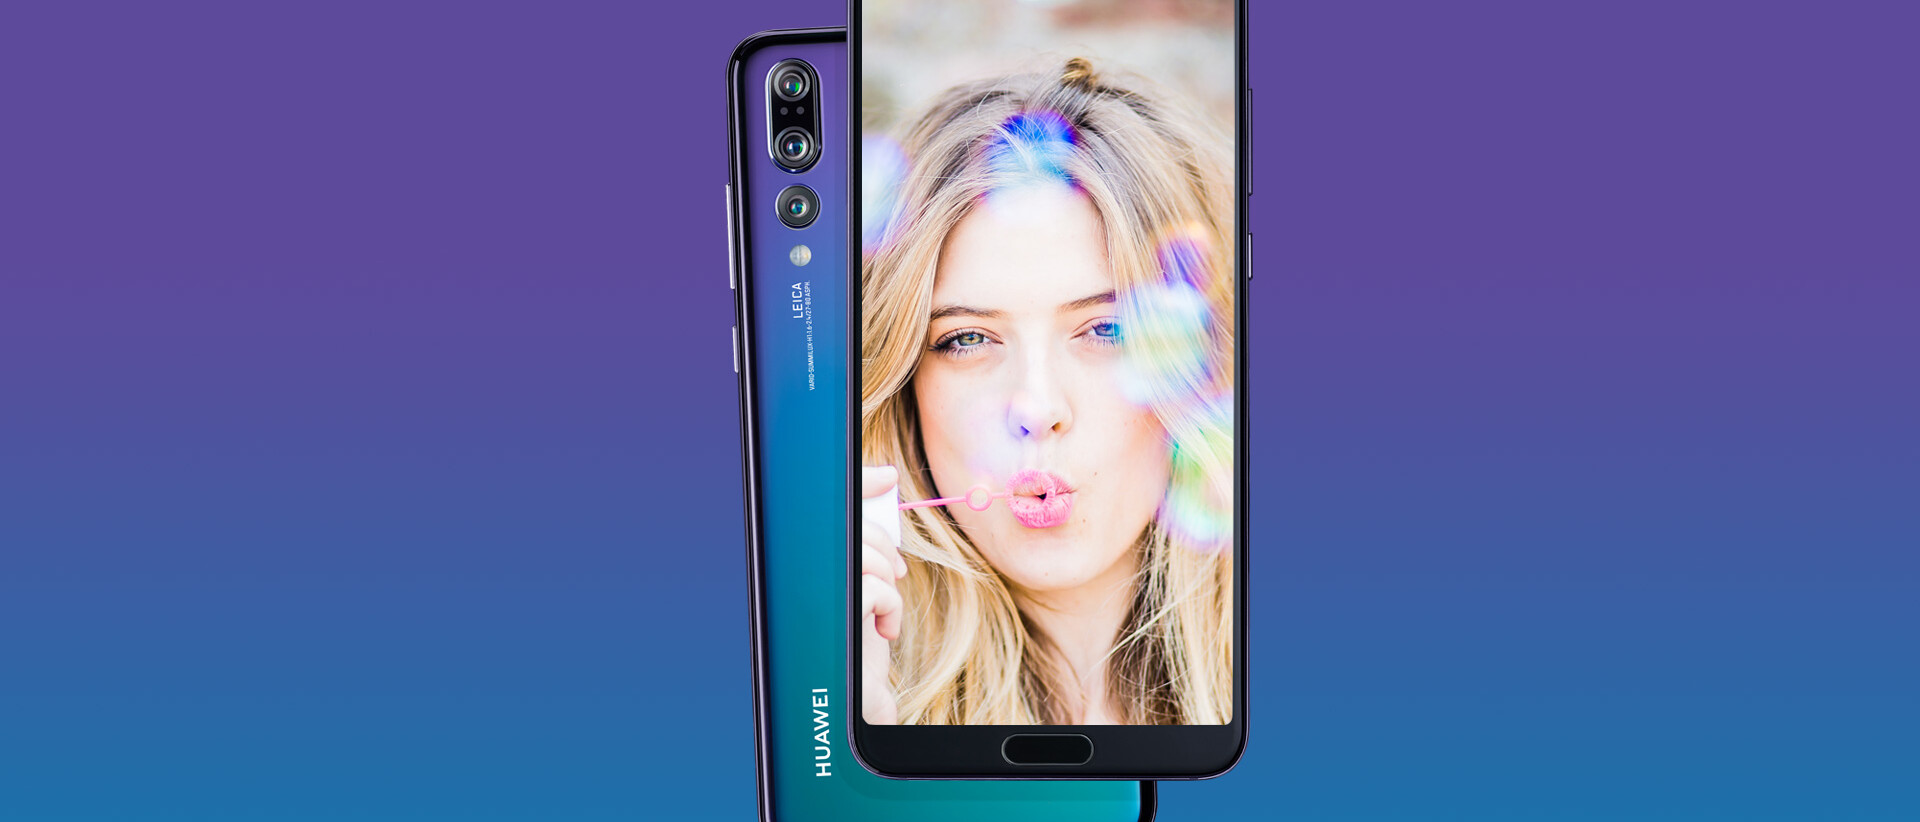 HUAWEI P20 Pro e-learning Header